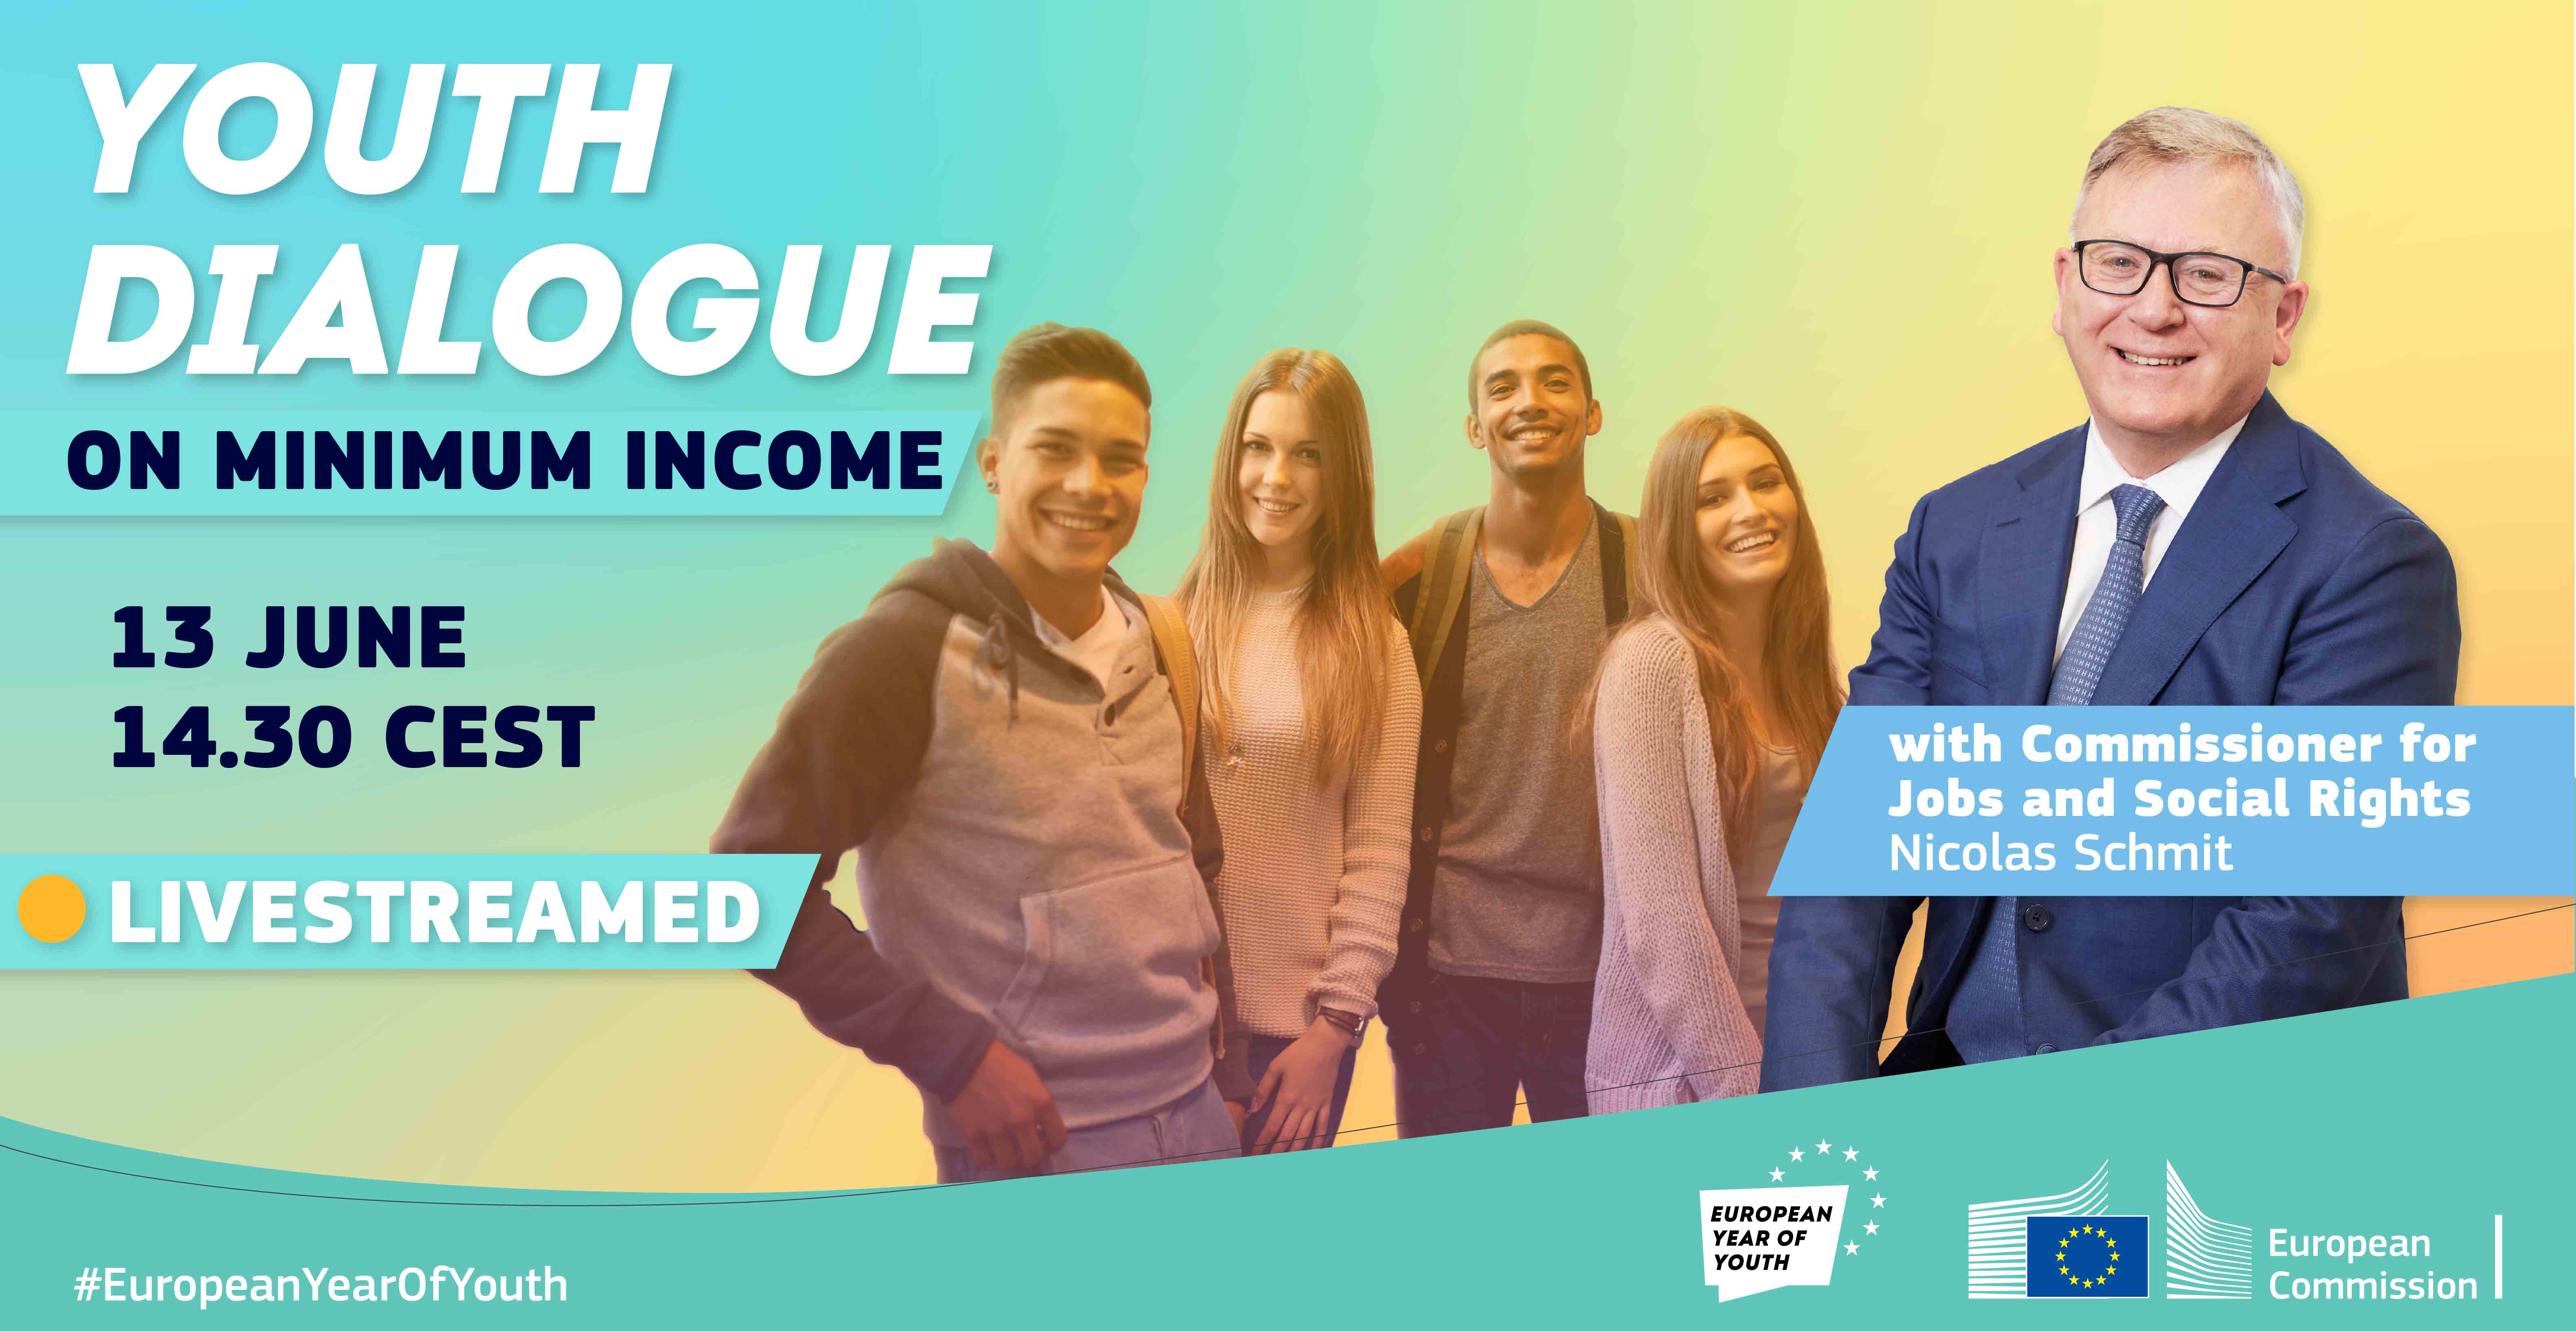 Youth dialogue on minimum income with European Commissioner for Jobs and social rights, Nicolas Schmit - 13 June 14:30 CESt - Livestream #Europeanyearofyouth 